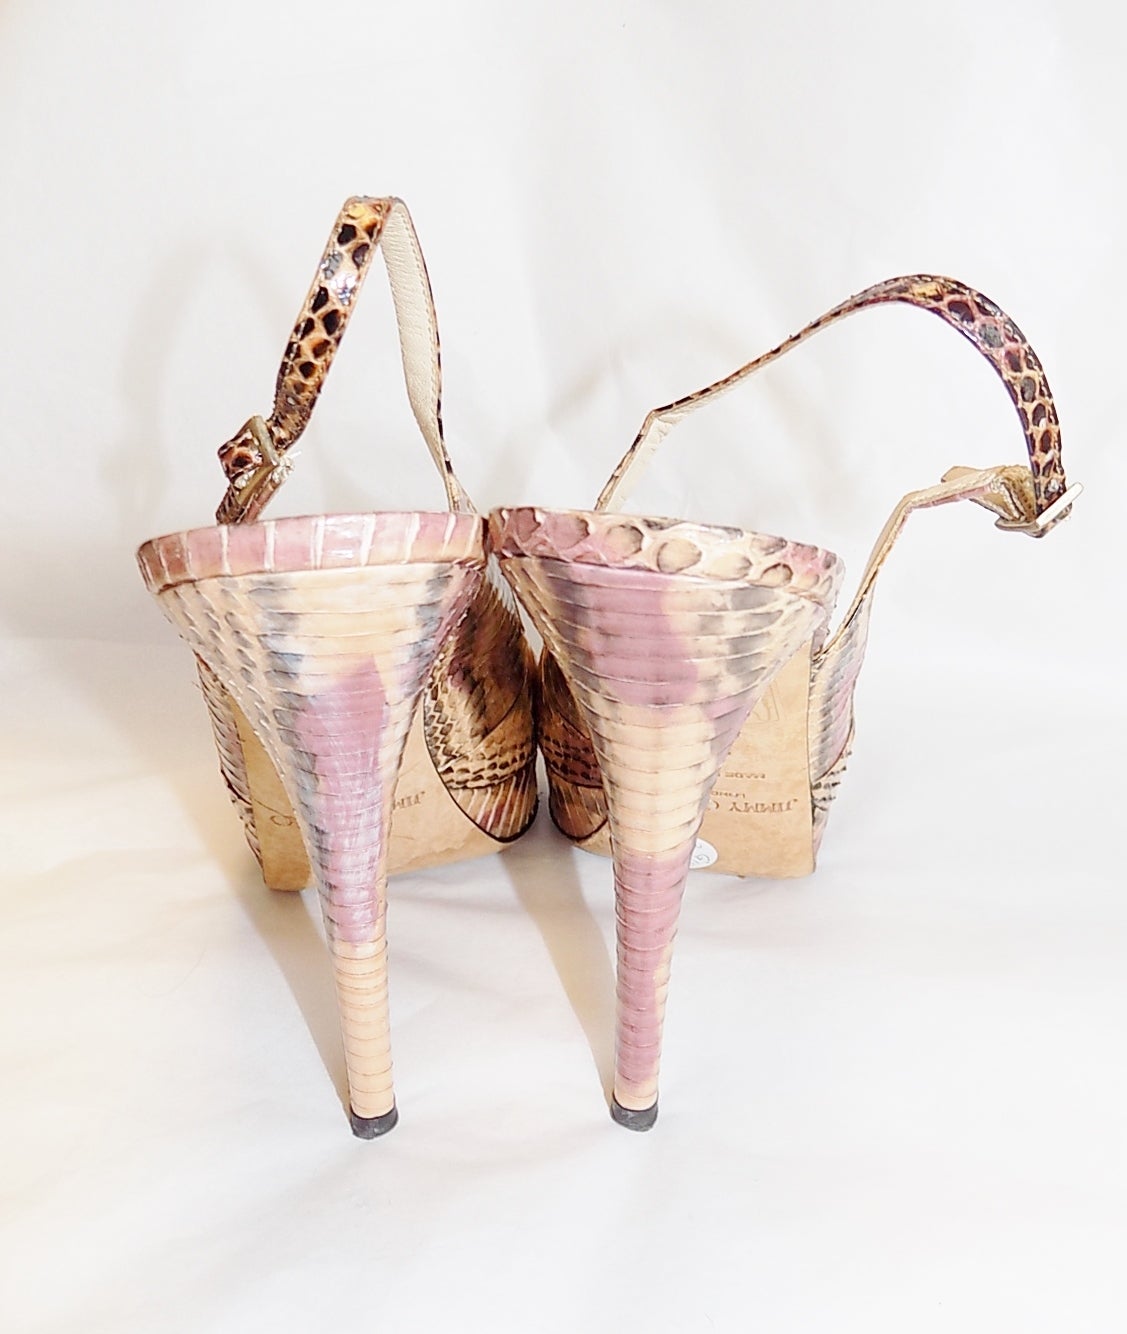 Guaranteed Authentic! Jimmy Choo blush -neutral Stiletto Peep Toe Snakeskin Pumps (Size 8.5). Neutral- blush colors  . small platform and 5 inch stiletto heel. Size 38. worn twice. Pristine condition!